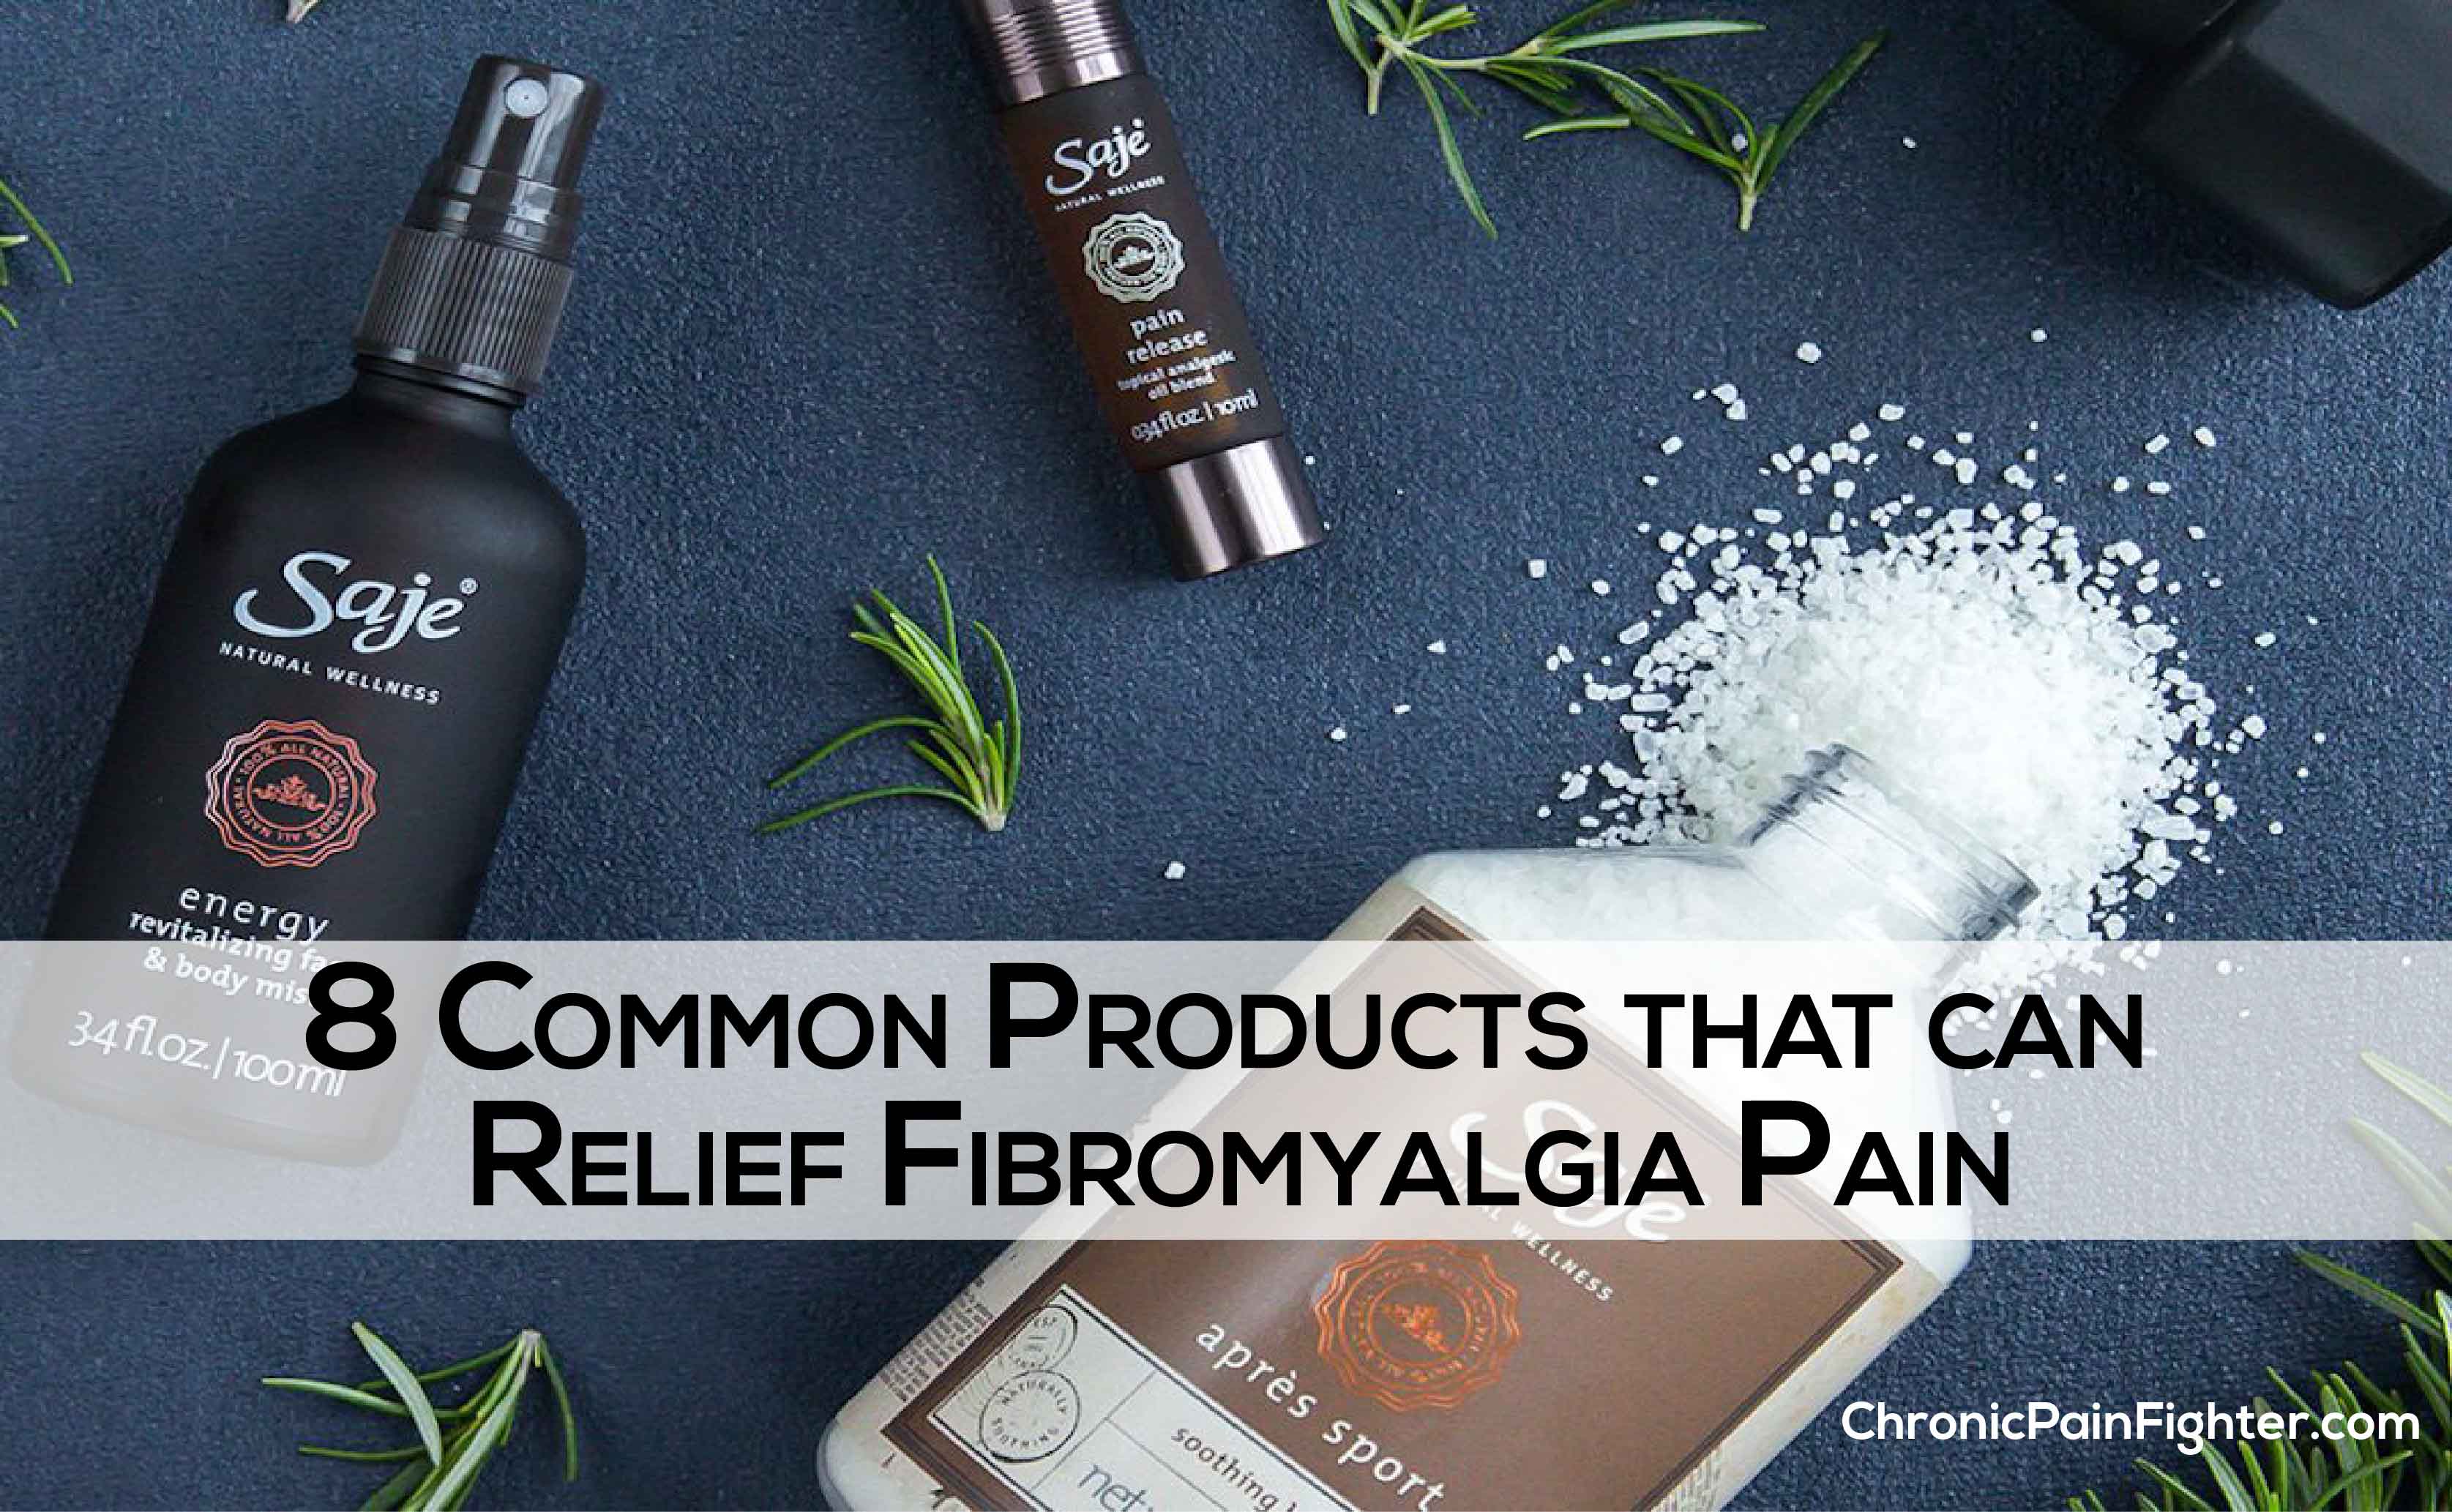 8 Common Products that Can Relief Fibromyalgia Pain